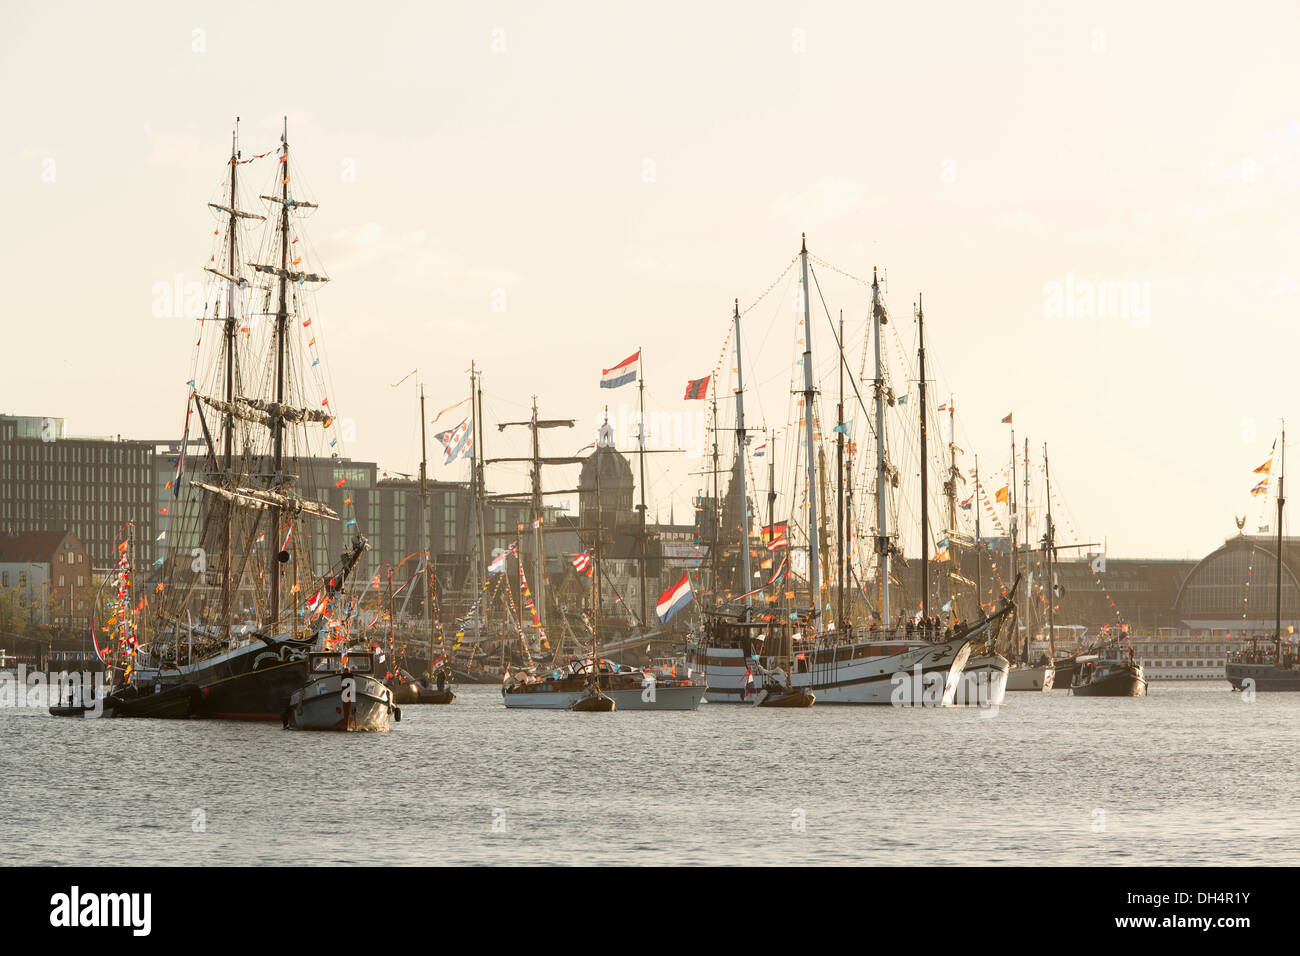 Netherlands, Amsterdam, 30 April 2013, Inauguration of King Willem-Alexander and  Queen Maxima. Ships decorated with many flags Stock Photo